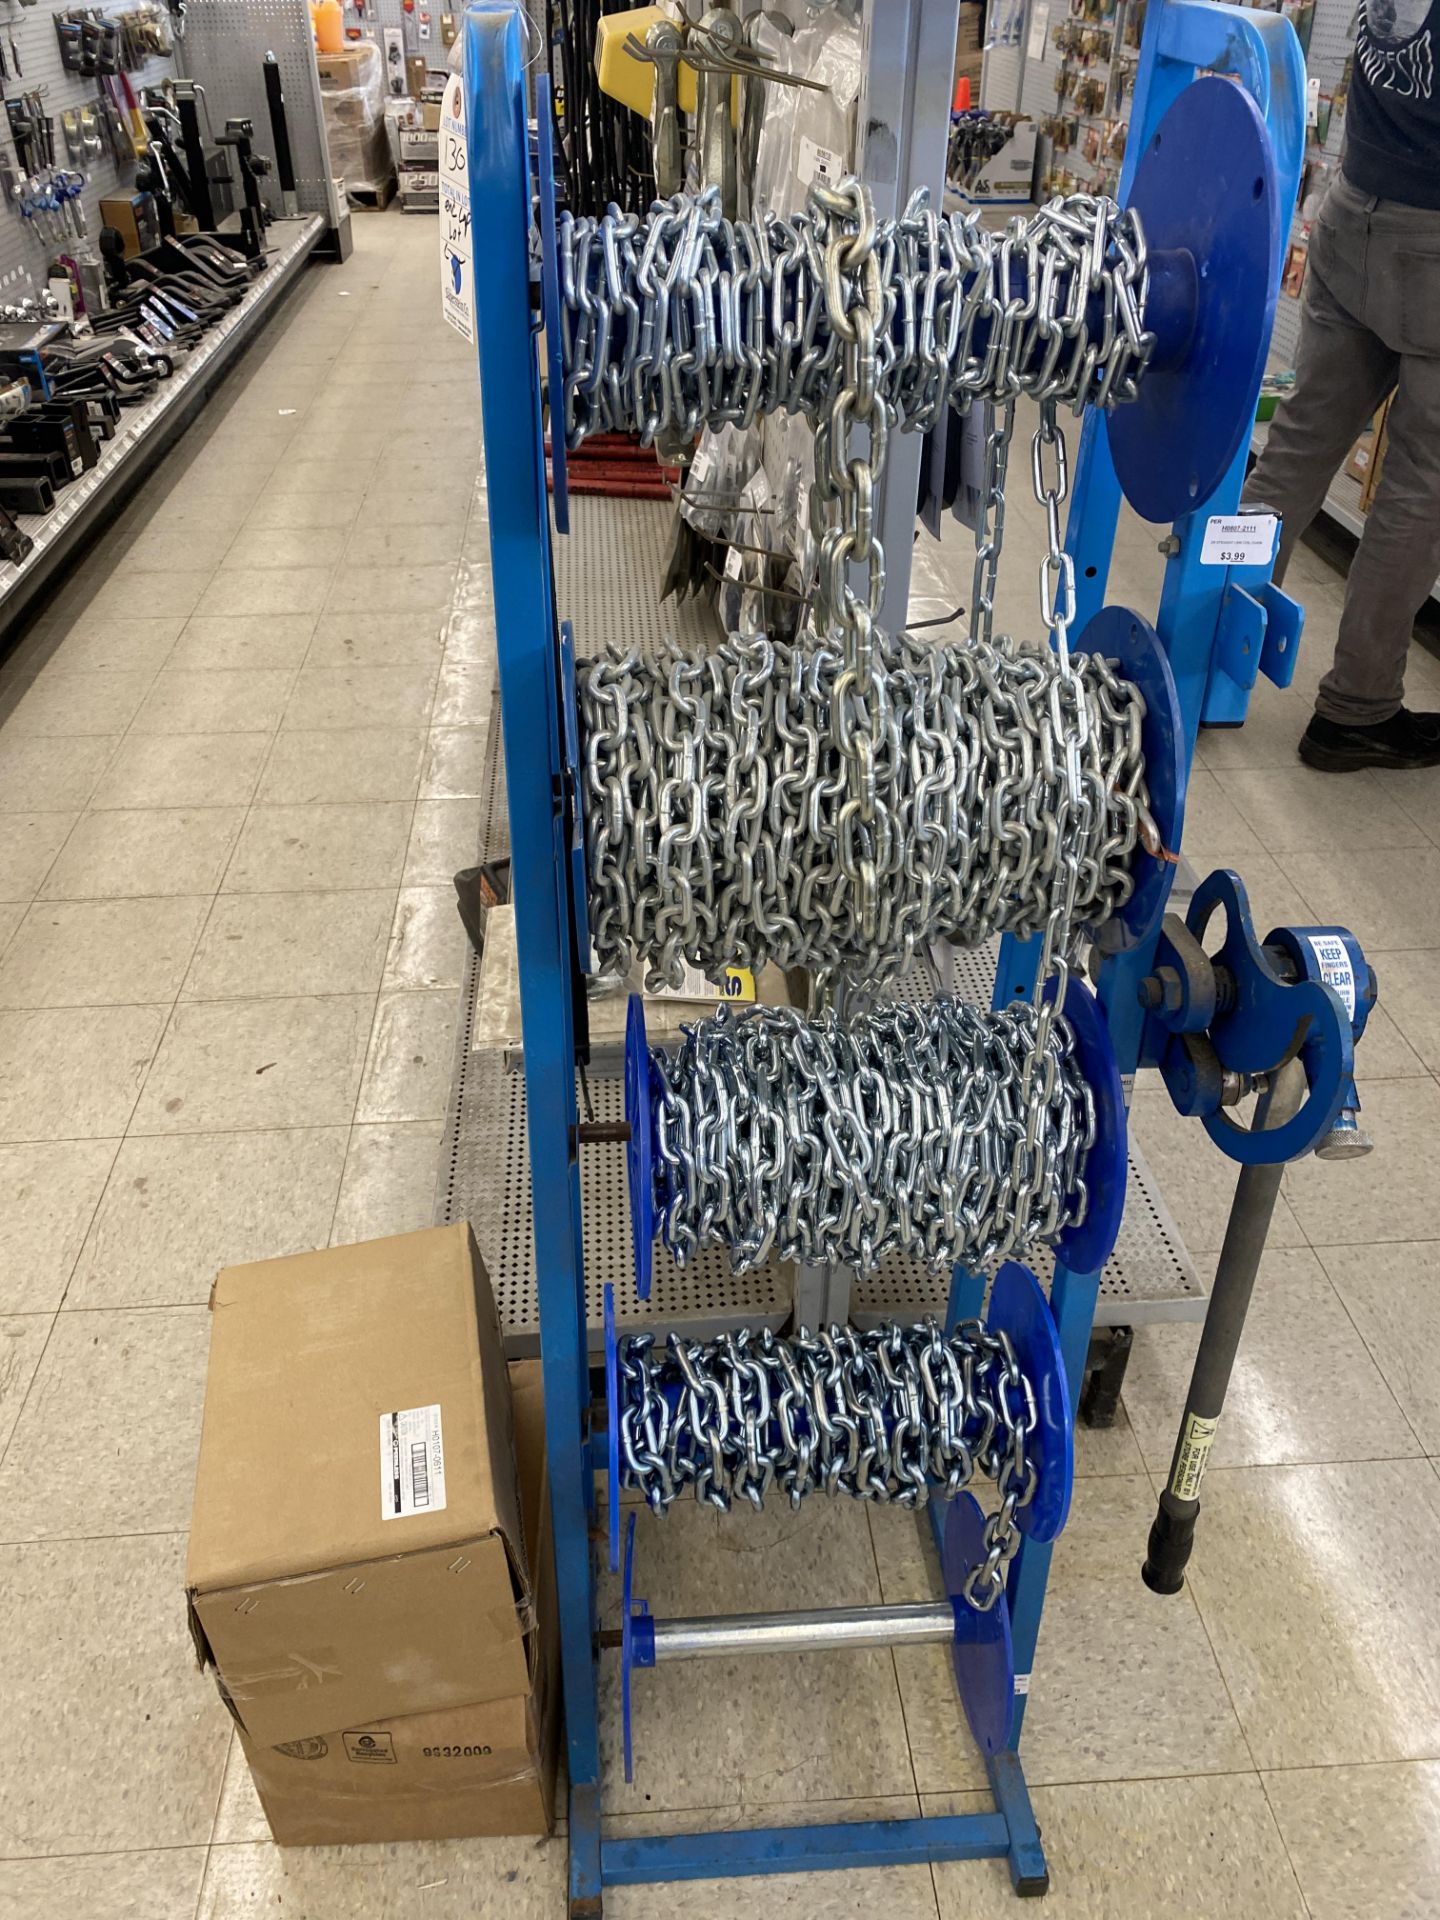 {LOT} Peerless 3/16", 1/4", and 5/16" Chains w/ D Rings and Hooks w/ Rack Wholesale Value 1000